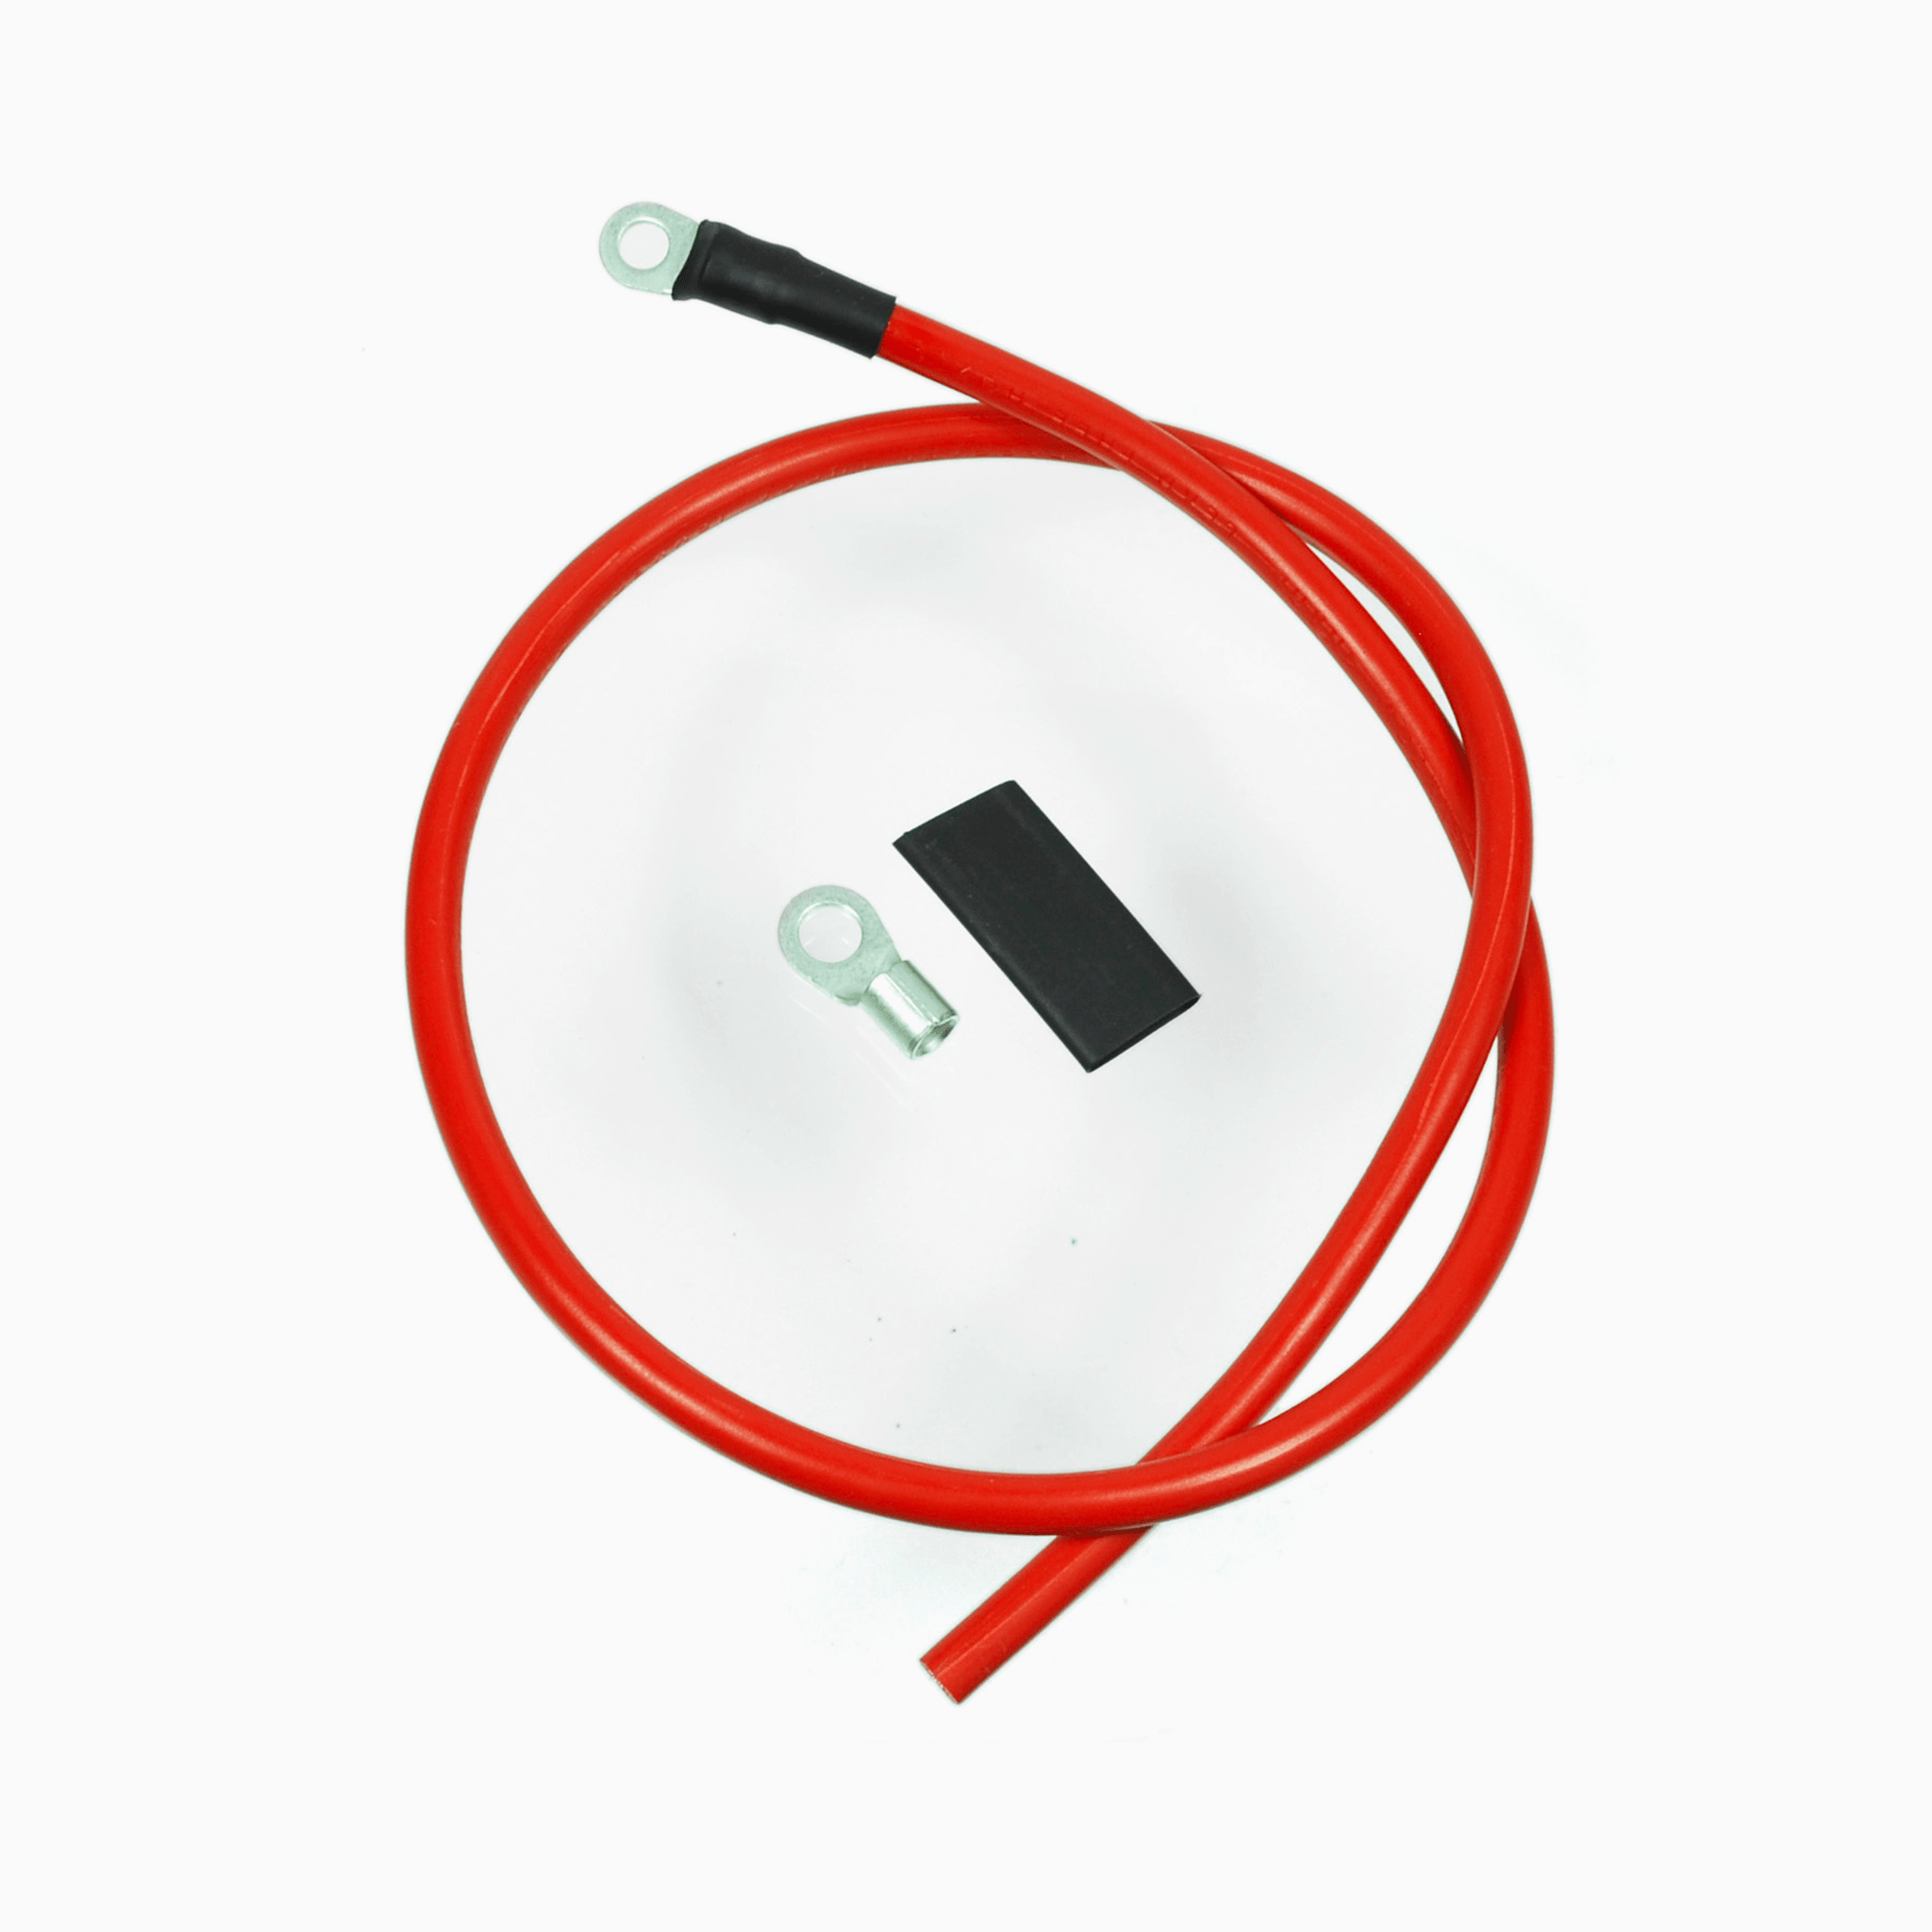 MO.unit battery cable (without fuse)